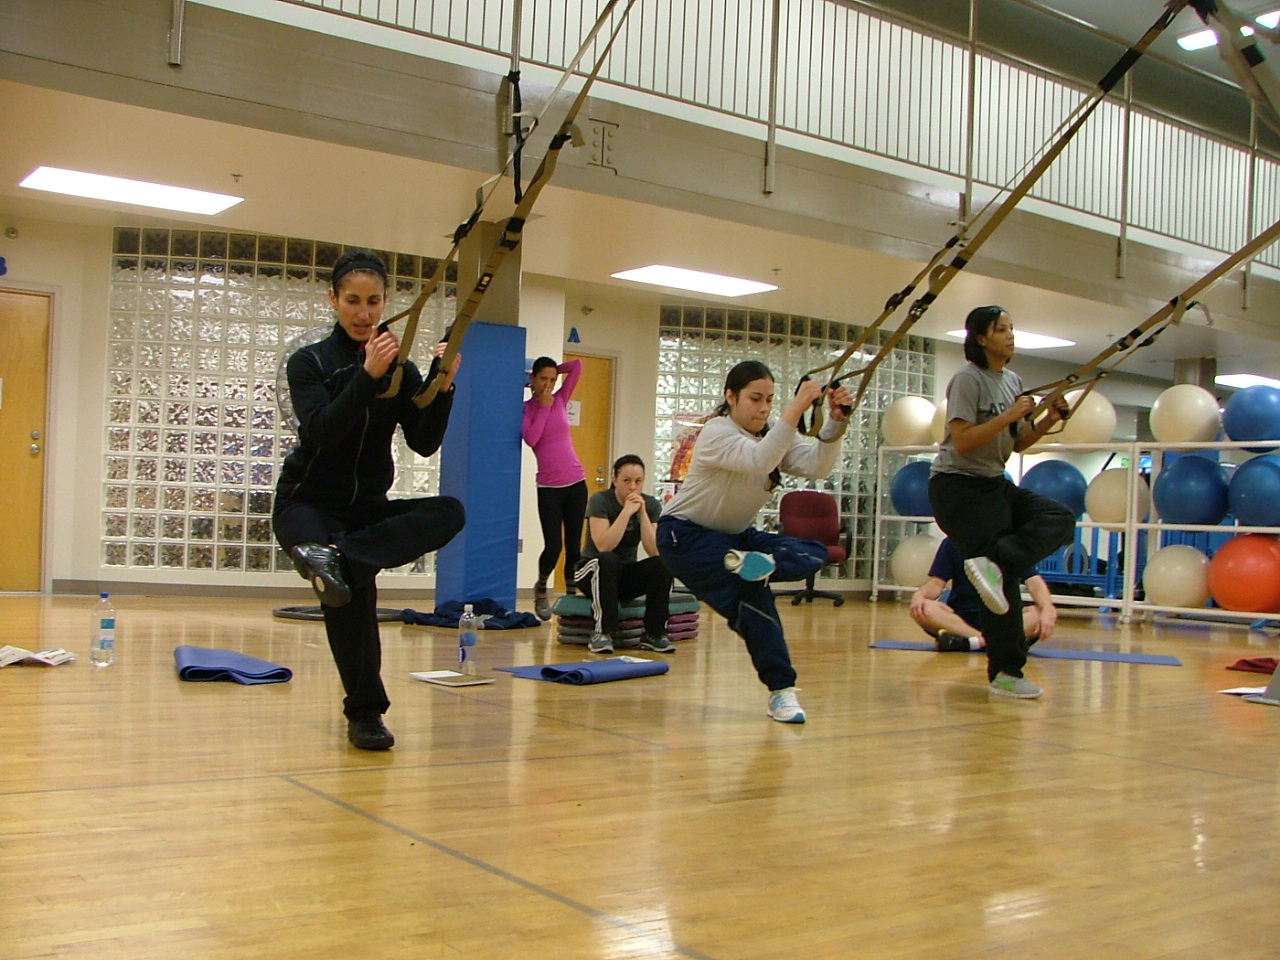 people on a gym doing aerial exercise